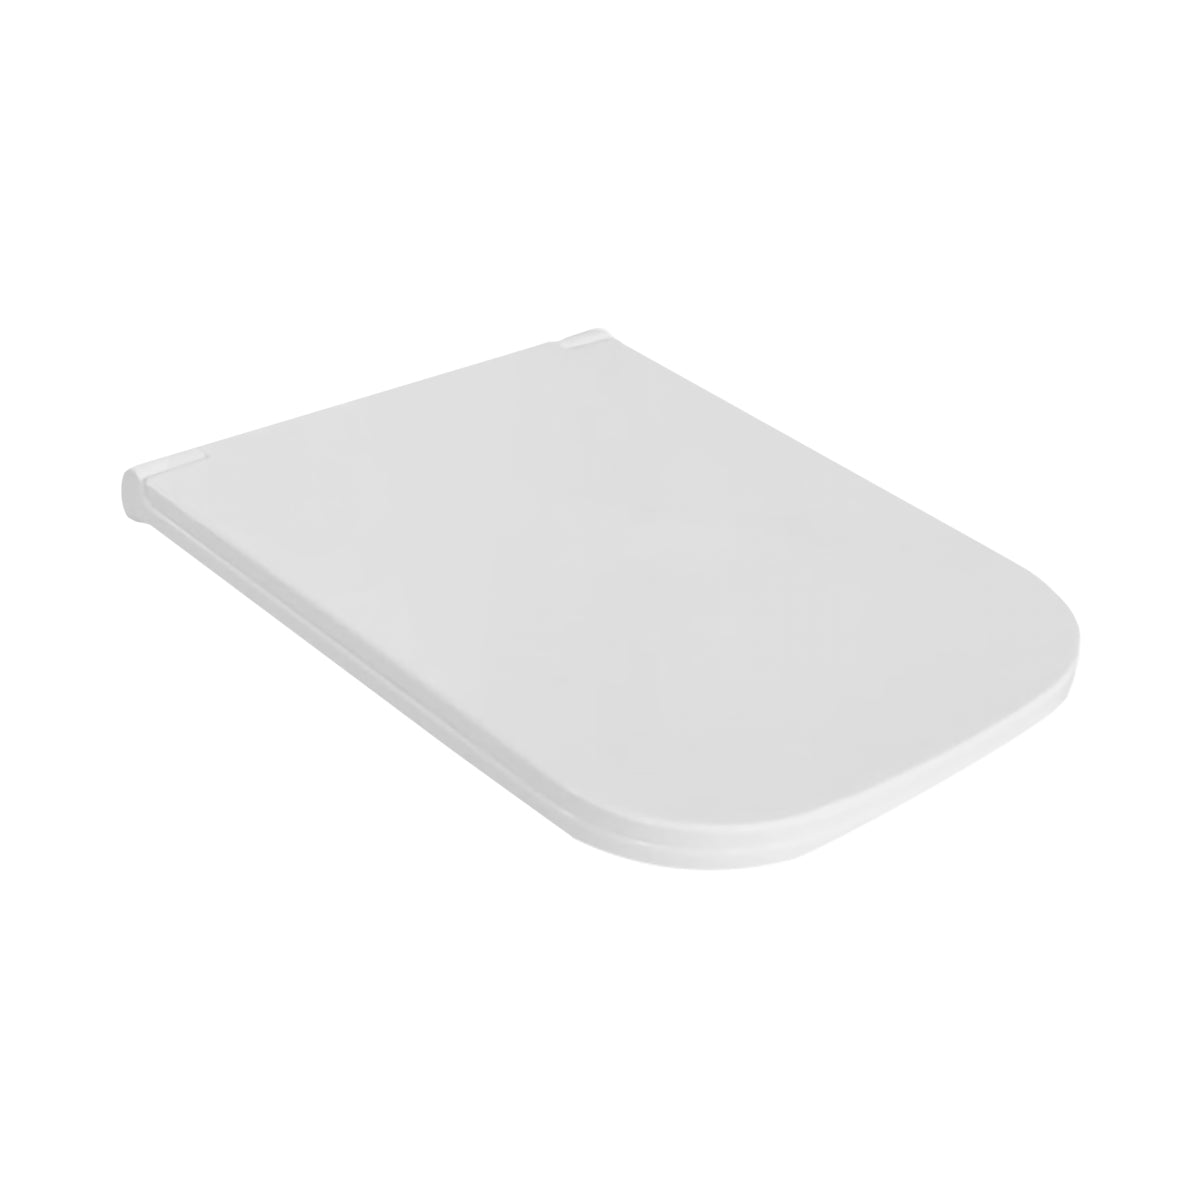 Square Shaped Quick Release Soft-Close Toilet Seat White